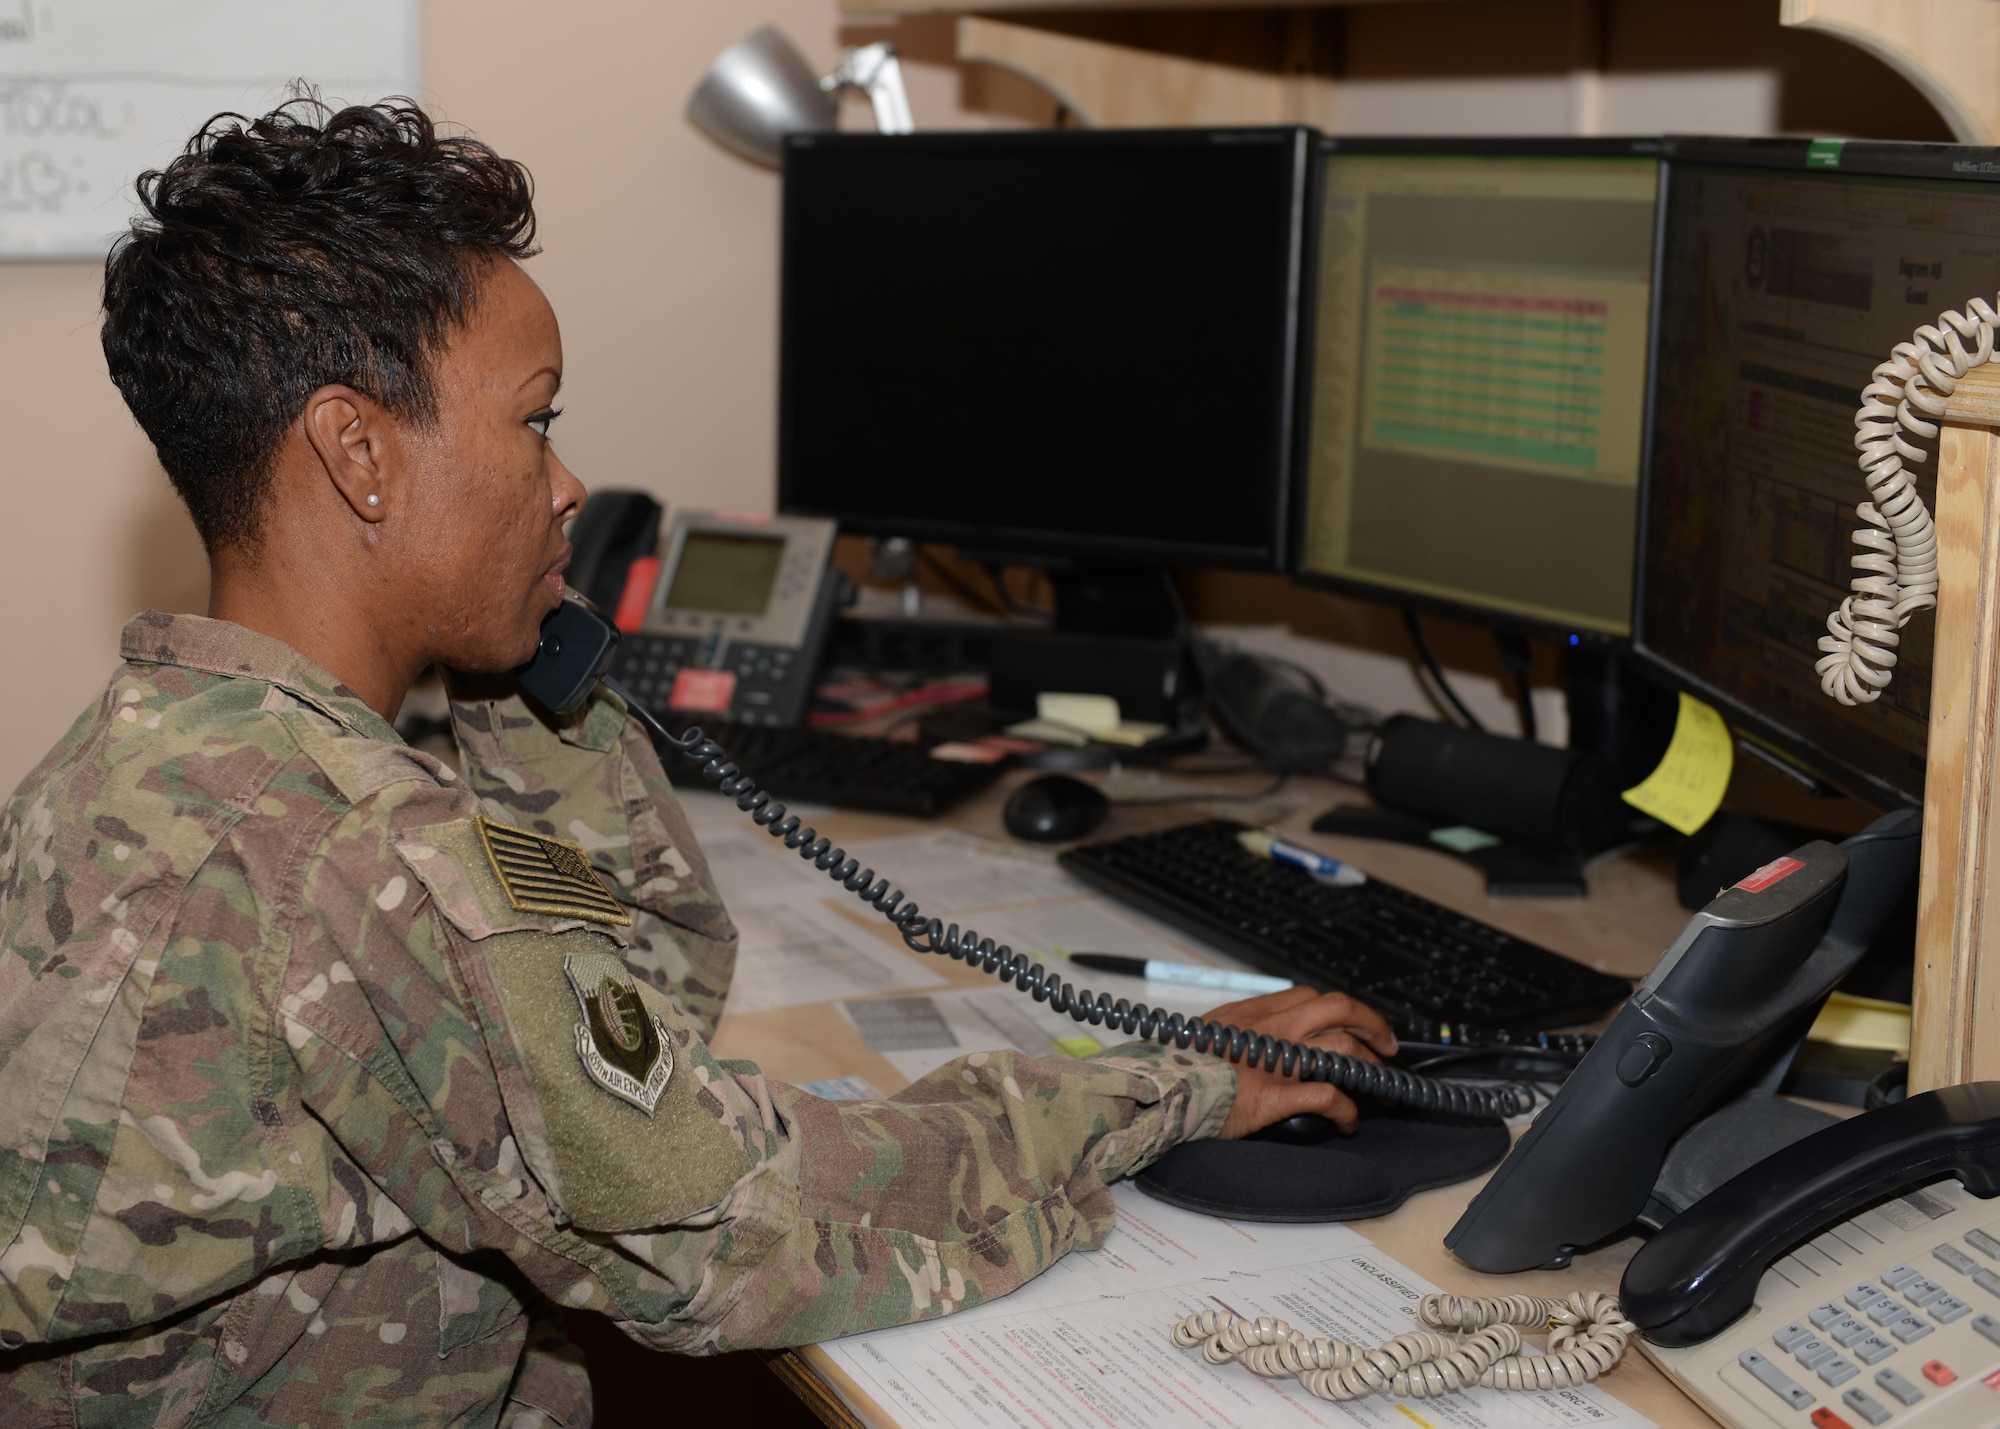 U.S. Air Force Tech. Sgt. Samantha Morgan, 455th Air Expeditionary Wing Command Post non-commissioned officer in charge of operations, takes down information before sending out mission critical information July 6, 2015, at Bagram Airfield, Afghanistan. Morgan and her team are responsible for initiating wing recalls, relaying weather and inbound attack notifications to the base as well as work with aircrews and other various agencies in keeping the base abreast on important information. (U.S. Air Force photo by Senior Airman Cierra Presentado/Released)